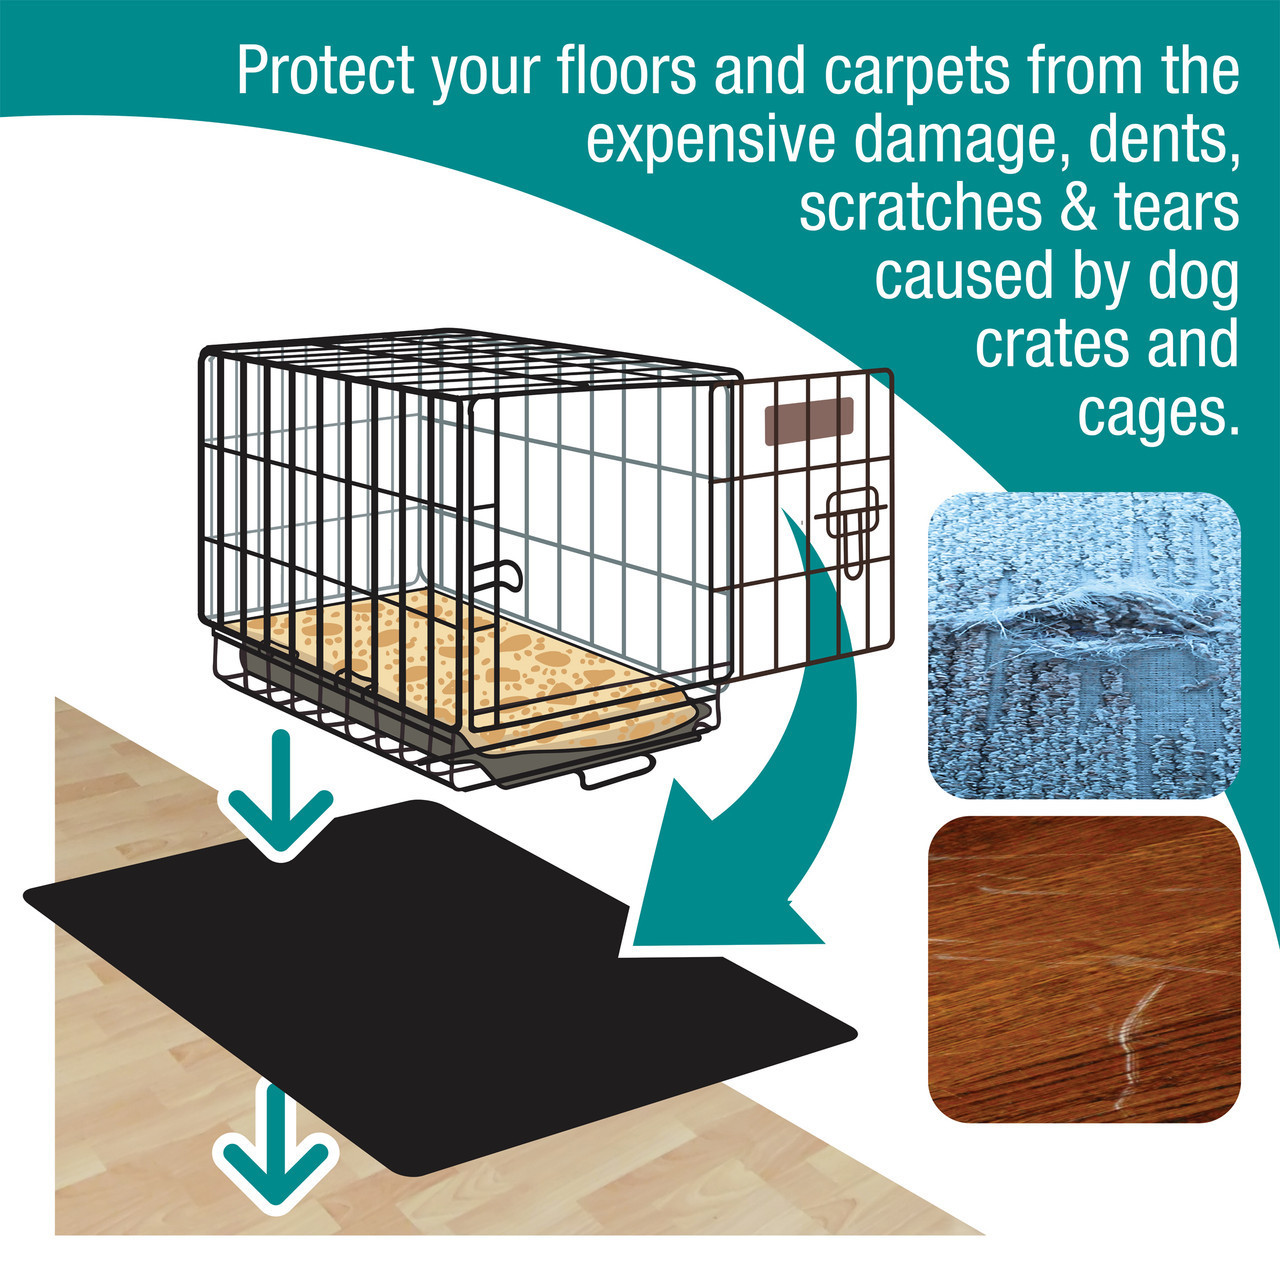 https://cdn11.bigcommerce.com/s-fjwps1jbkv/images/stencil/1280x1280/products/371/3814/p-tex-pet-crate-polypropylene-floor-protection-mat-for-use-on-hard-floors-and-carpets-or-rectangular-dog-crate-mat-or-black-or-3-sizes-available__50598.1688995234.jpg?c=2?imbypass=on